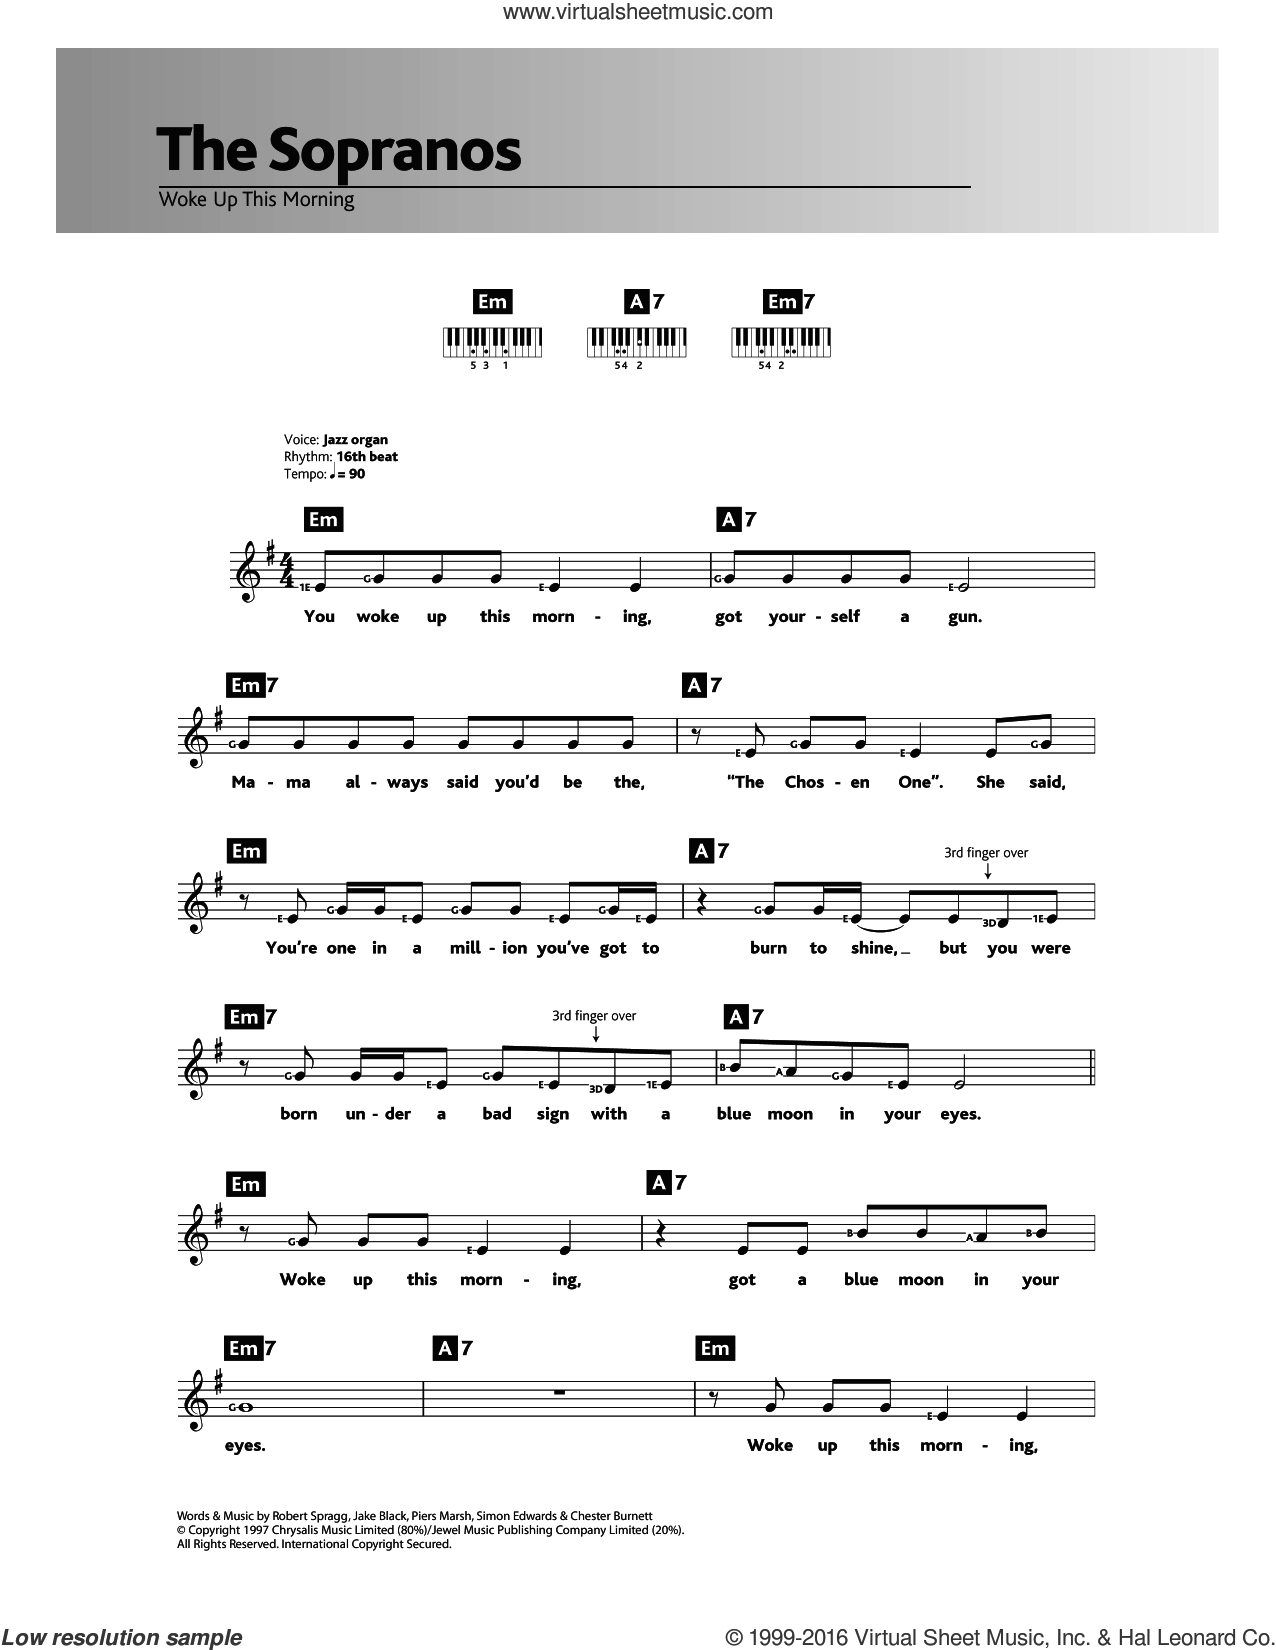 3 - Woke Up This Morning (Theme from The Sopranos) sheet music (intermediate) for piano solo ...